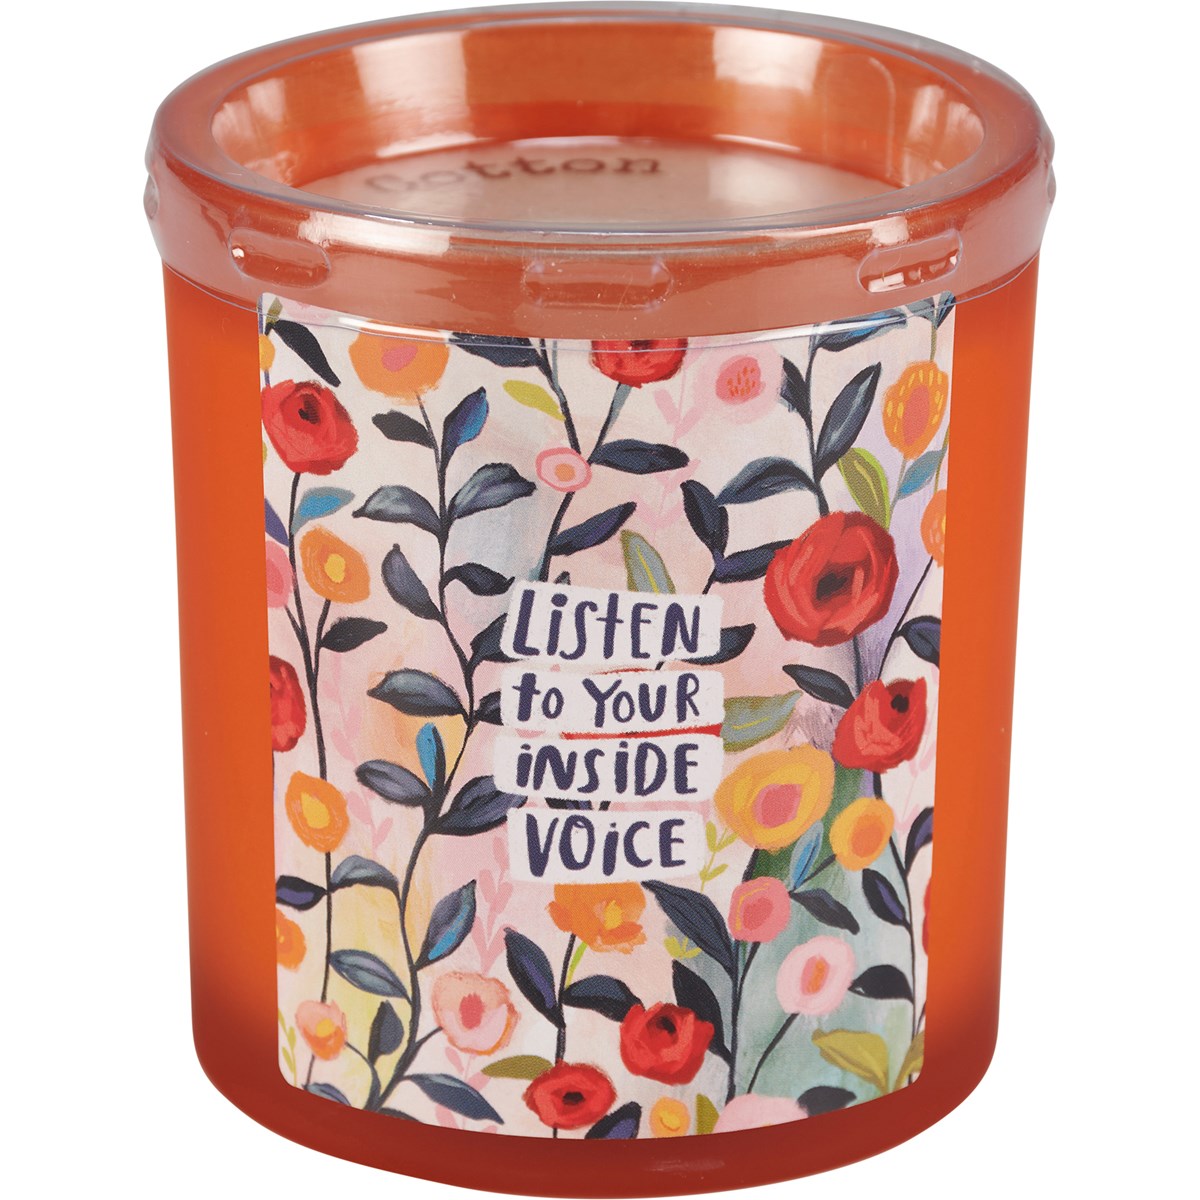 Listen To Your Inside Voice Jar Candle - Soy Wax, Glass, Cotton